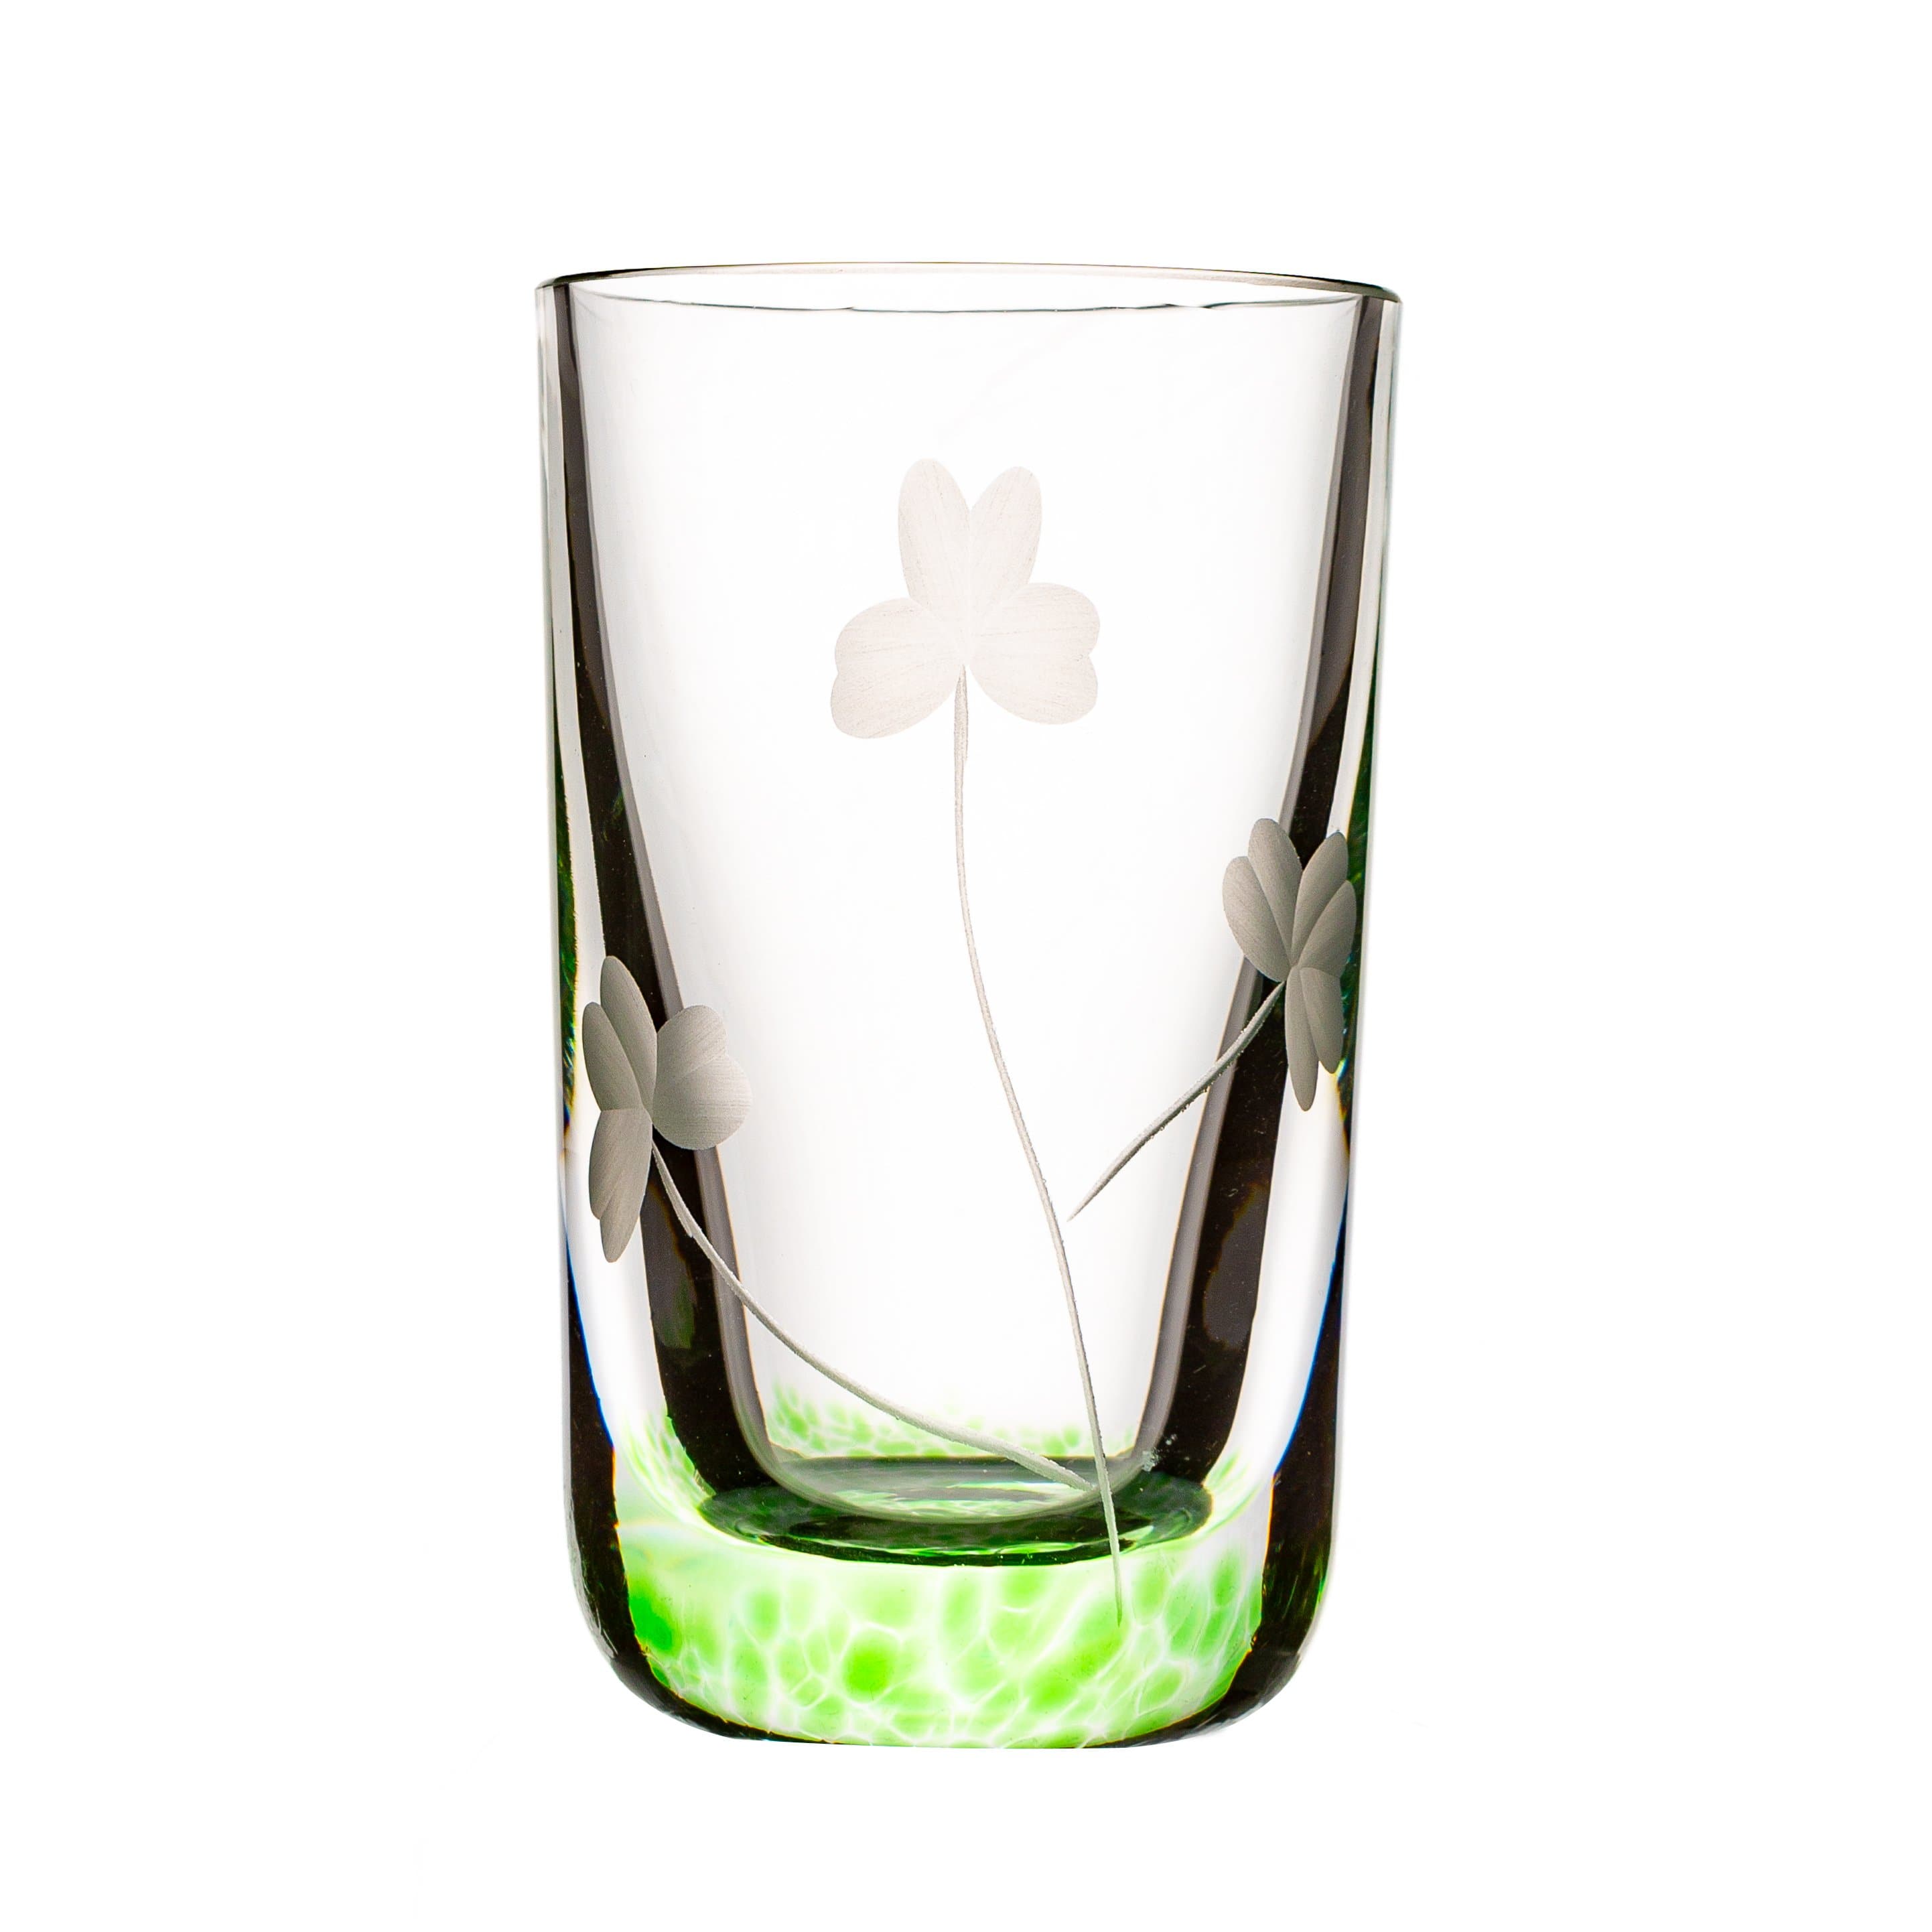 Shamrock Shot Glass Hand Crafted Mouth Blown Irish Glass Irish Gift Handcrafted by Our Maker-Partner in Co. Waterford Ireland